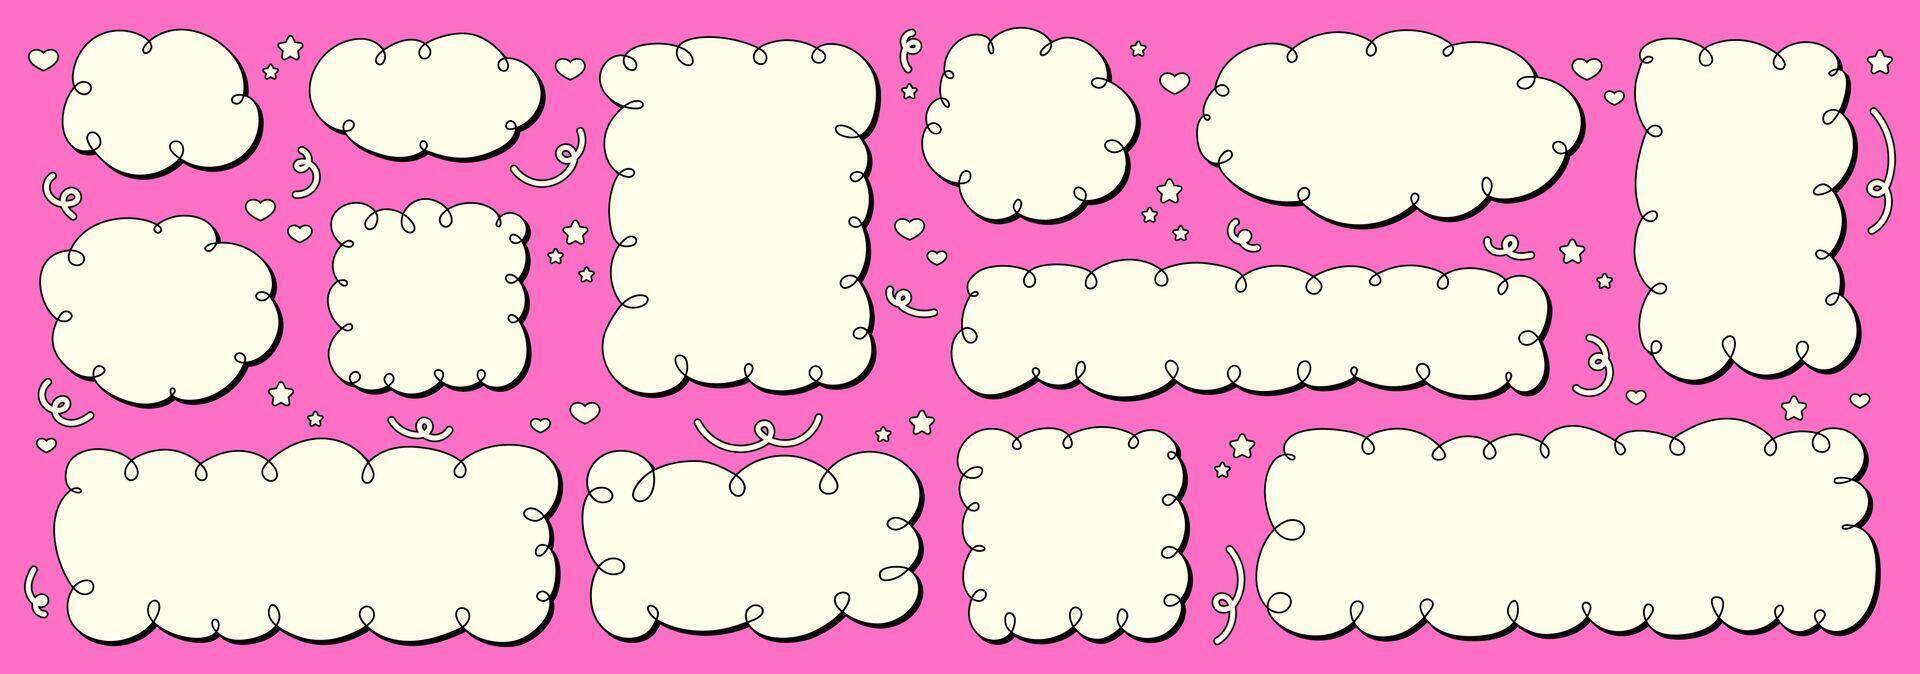 Vector set of empty speech bubbles and doodles in retro style. Hand drawn scribble for comics in pop art style.